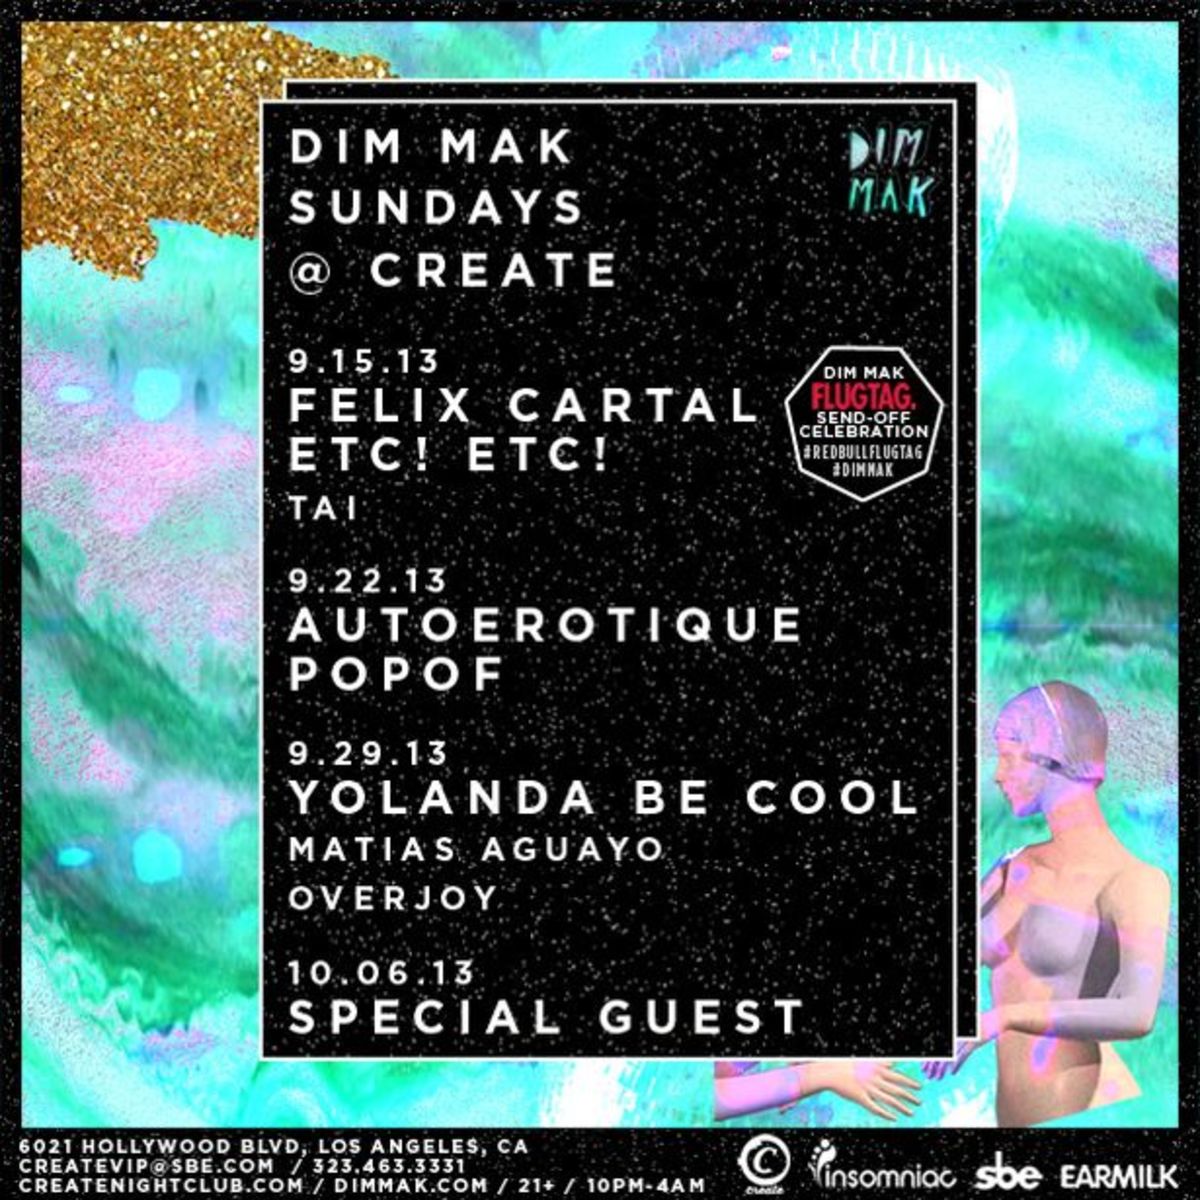 EDM Culture: Dim Mak Teams With Insomniac And SBE To Launch New Weekly Event- Dim Mak Sundays @ Create